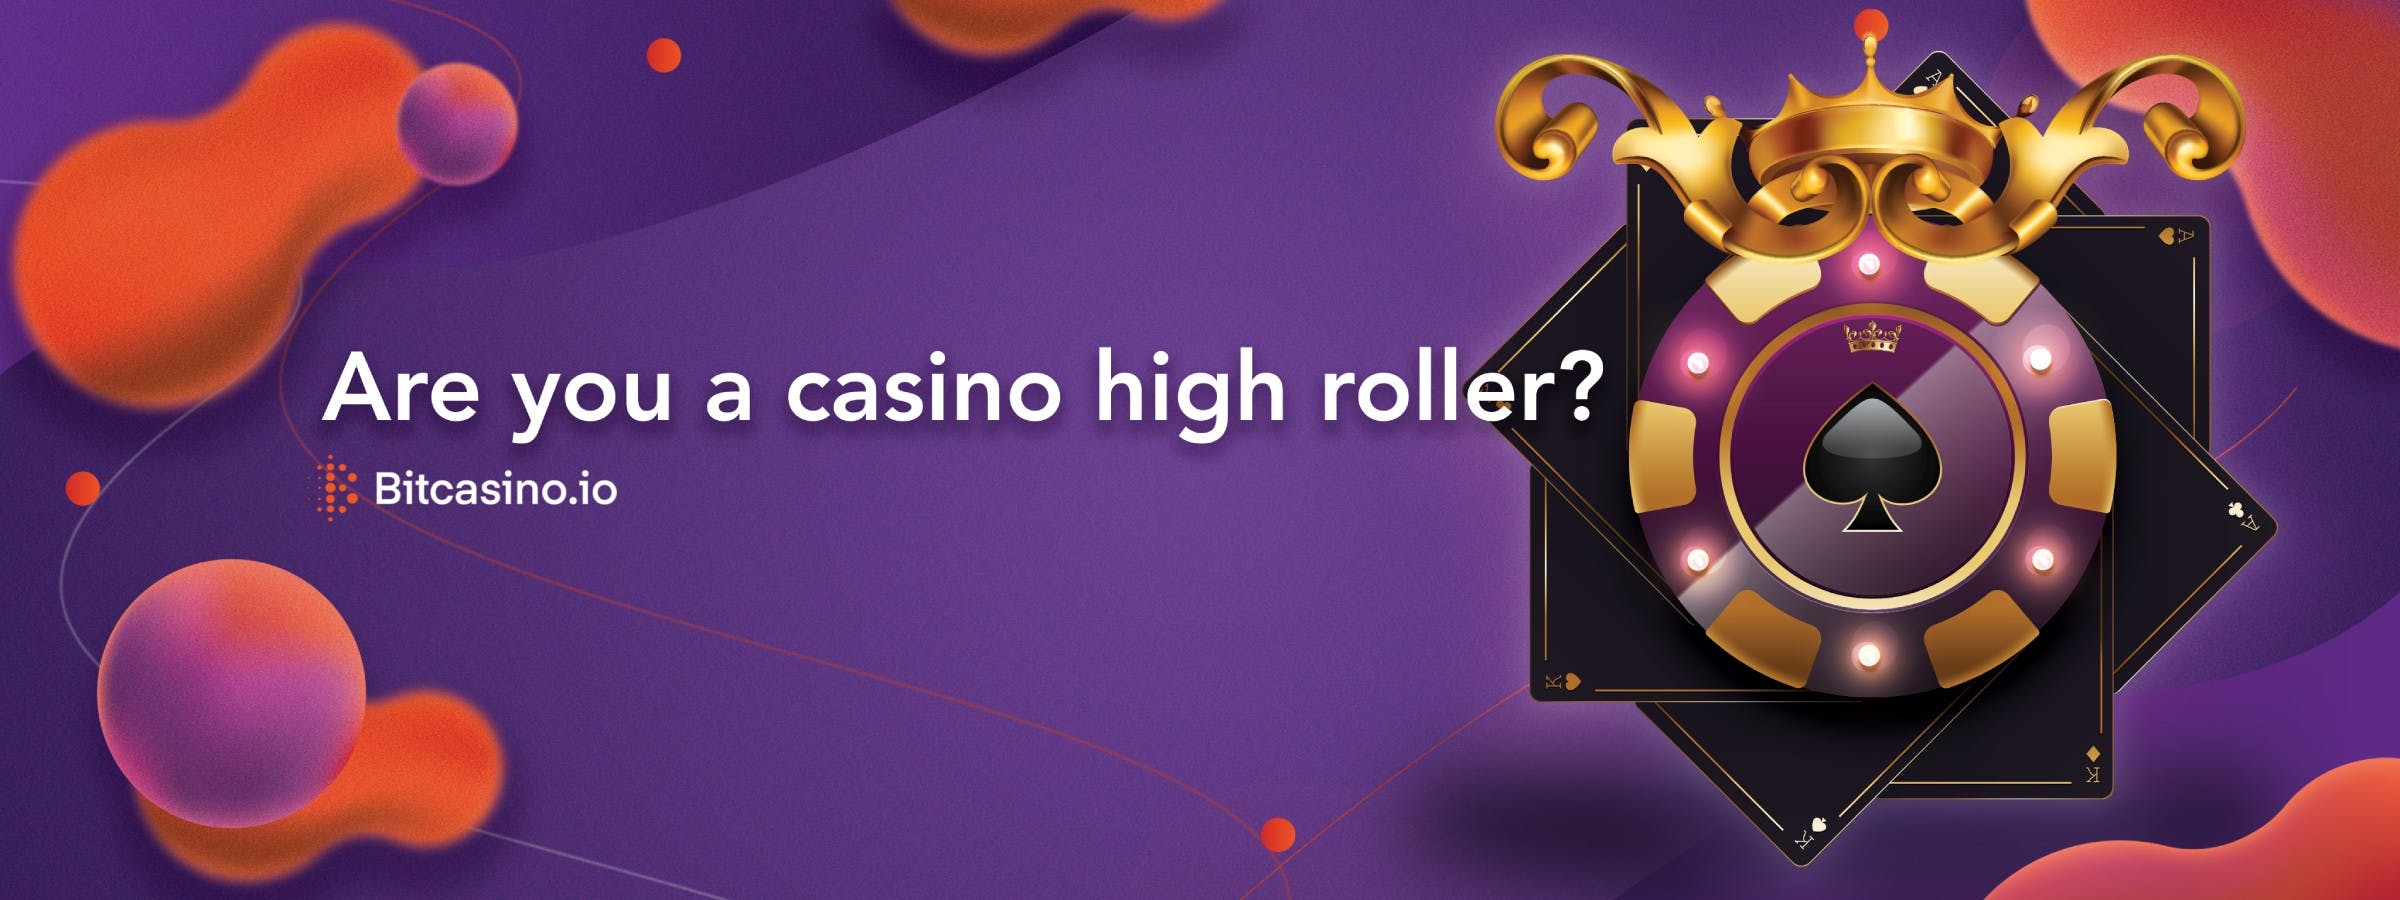 Are you a casino high roller?